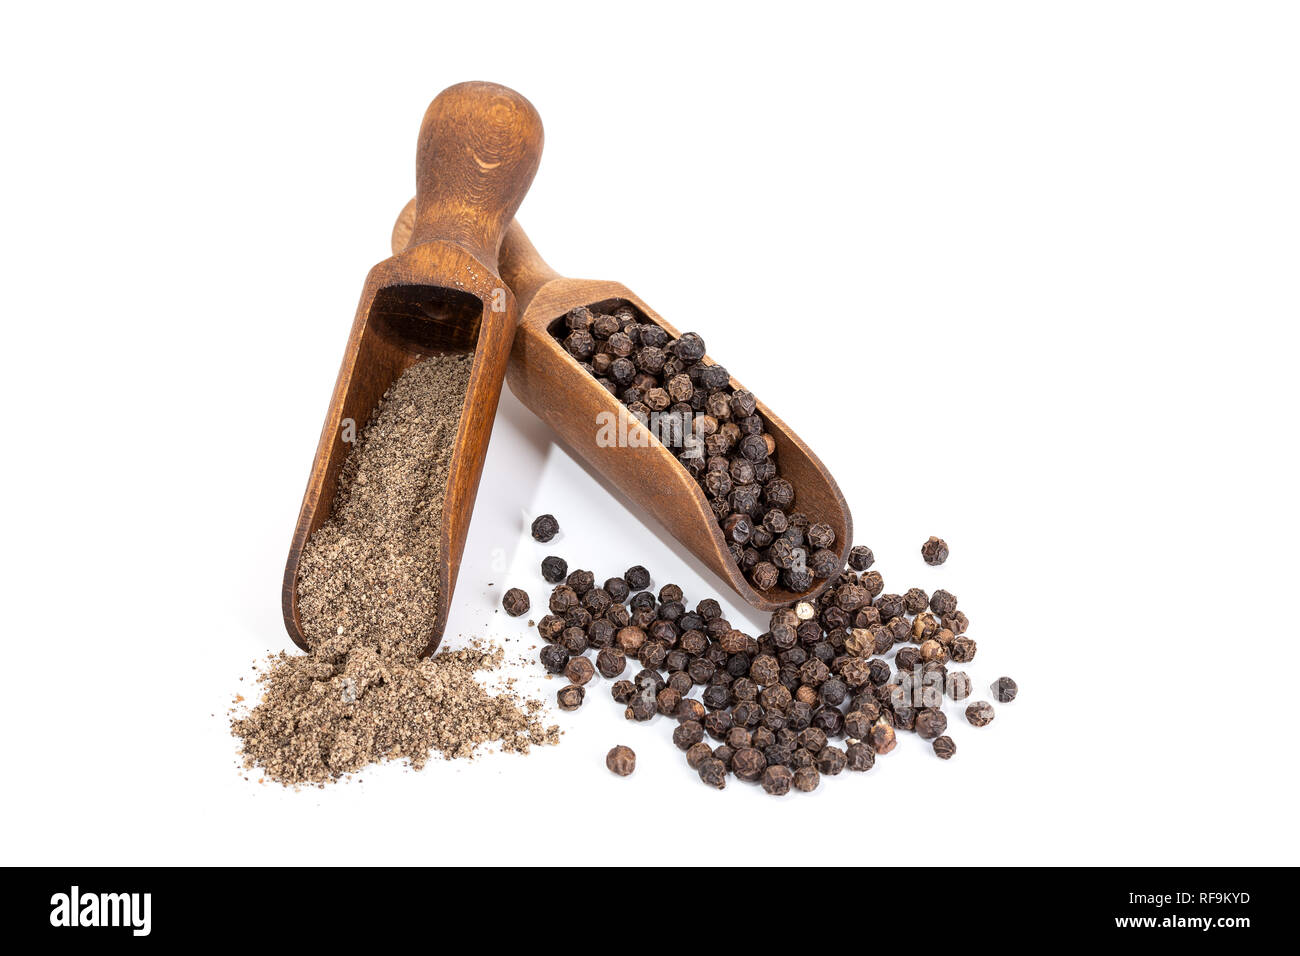 Black pepper seeds and Black pepper ground isolated on white background. Copy space. Piper nigrum Stock Photo